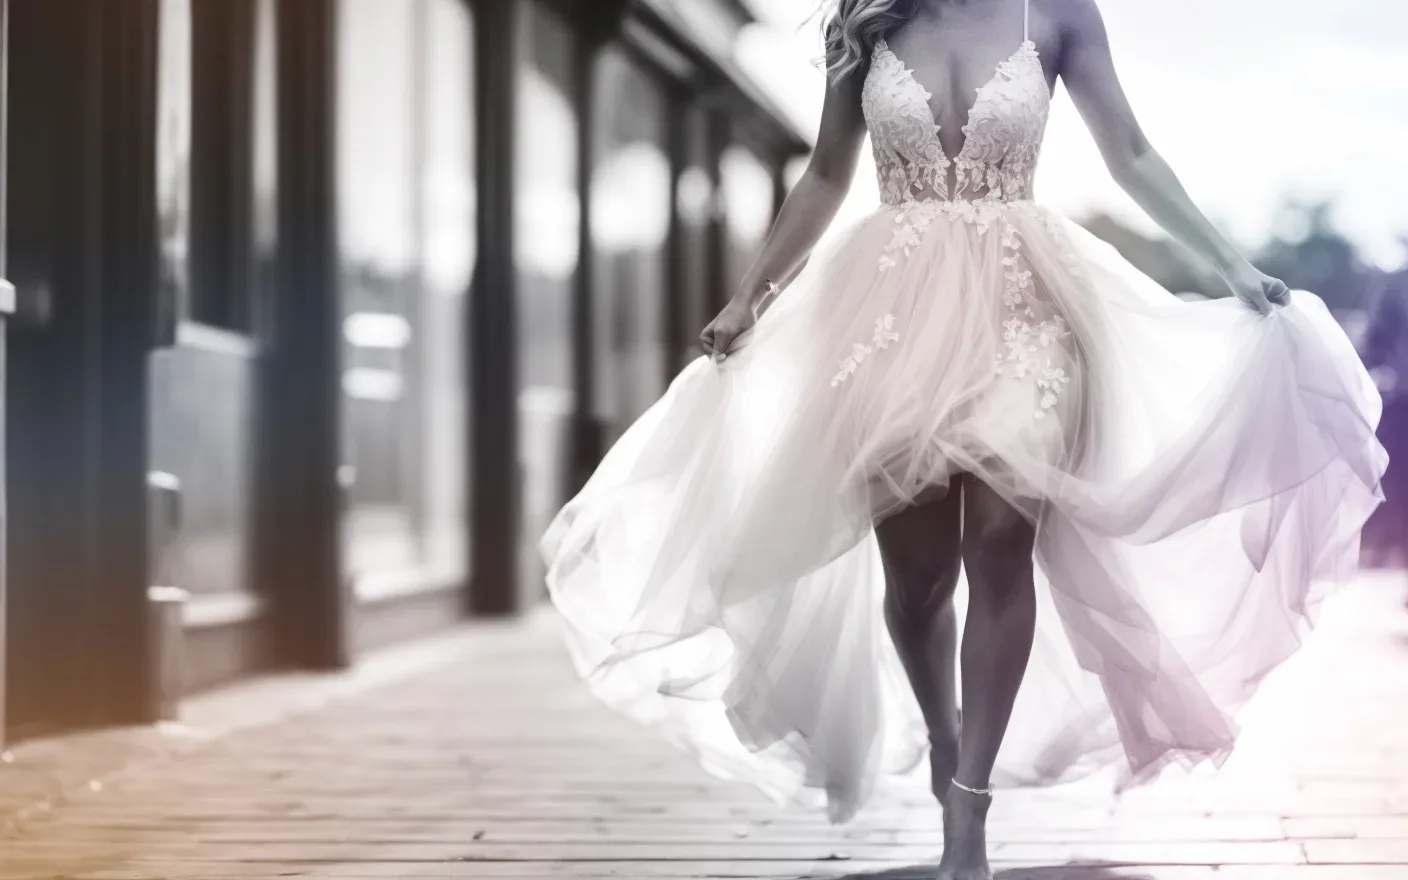 A woman in a white dress walking down the street. The new way to shoot weddings